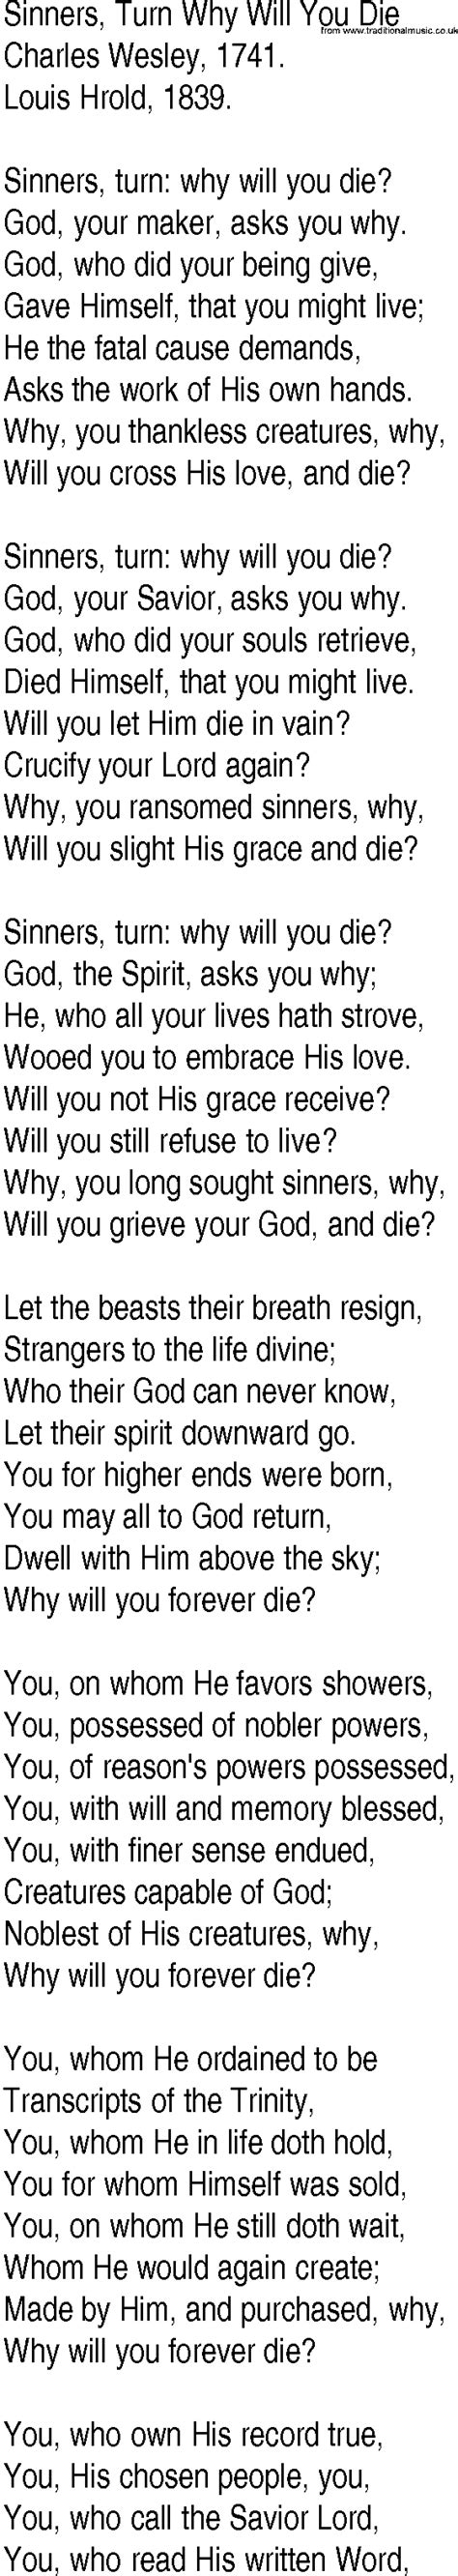 Hymn and Gospel Song Lyrics for Sinners, Turn Why Will You Die by